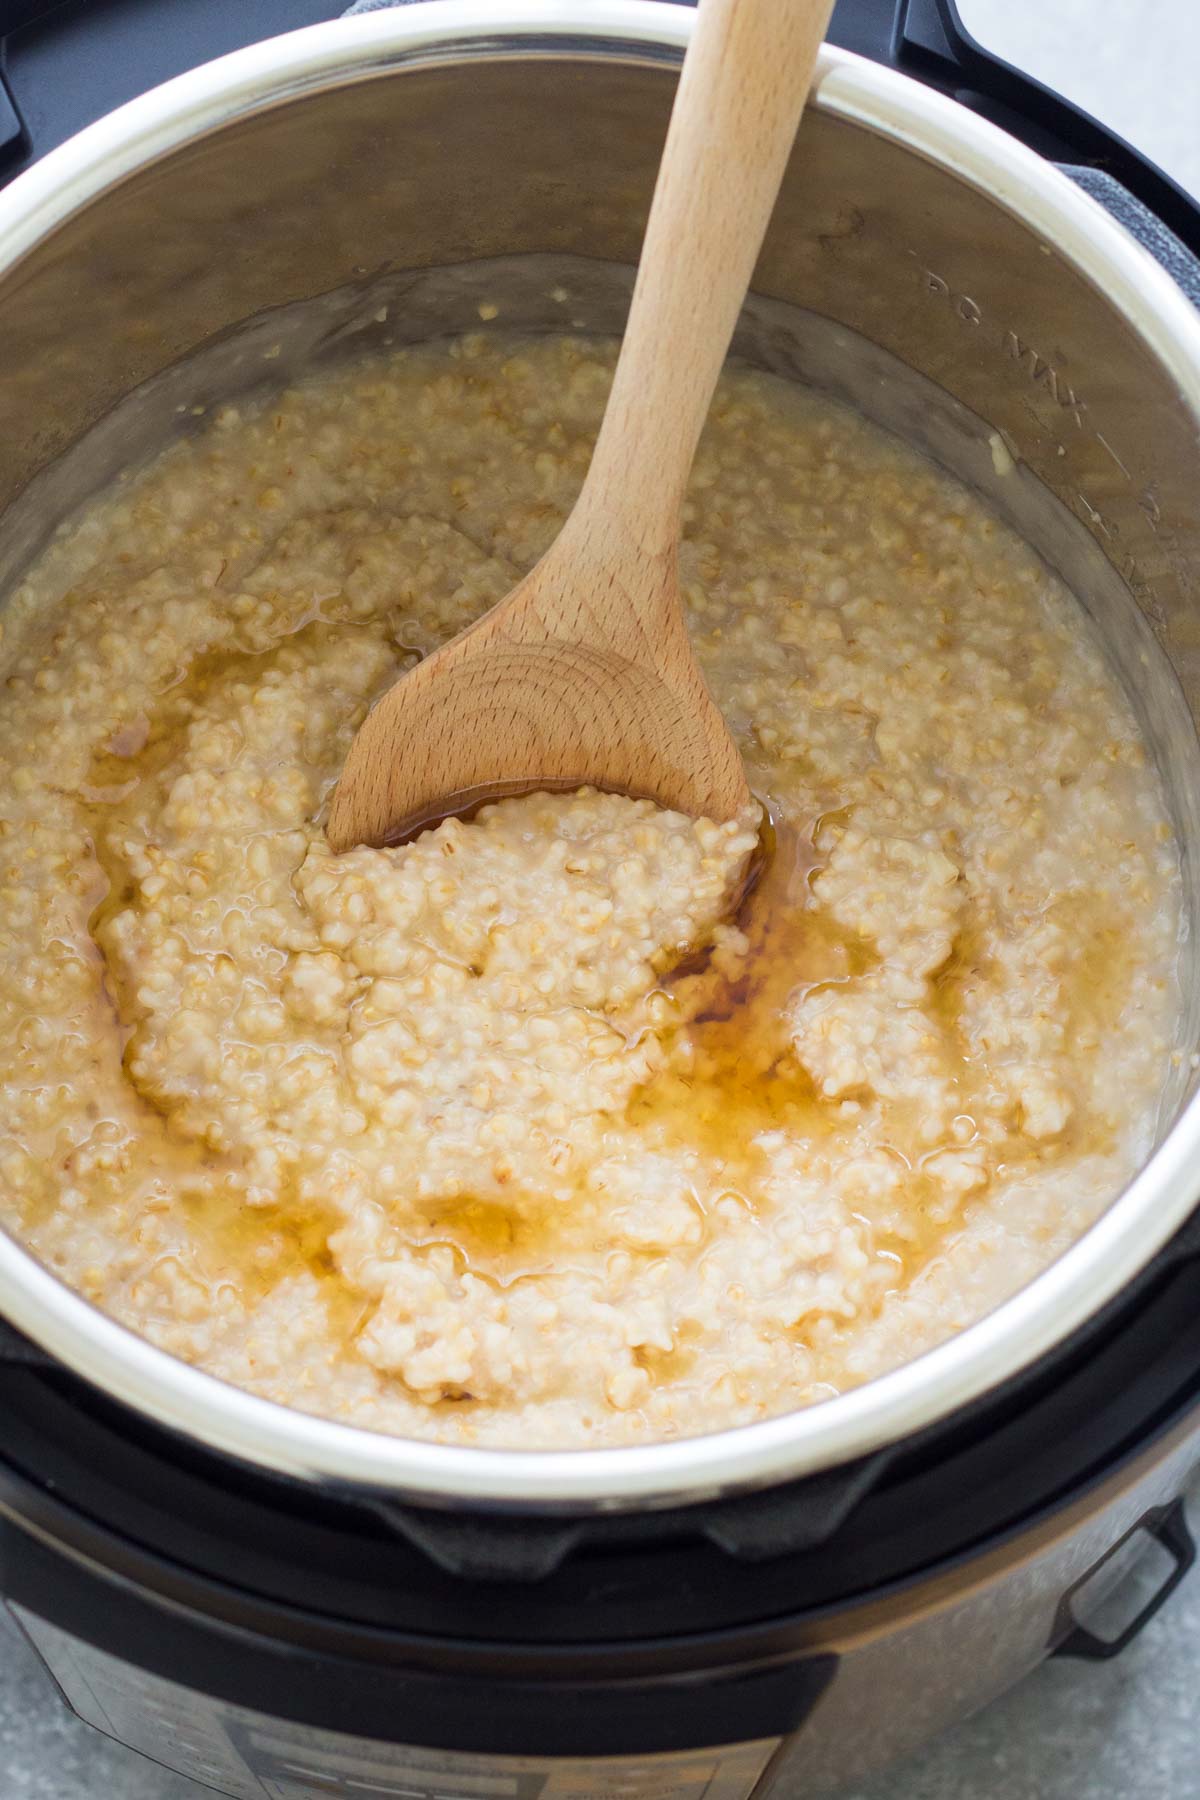 Cooked steel cut oats in instant pot with maple syrup drizzle and a wooden spoon.